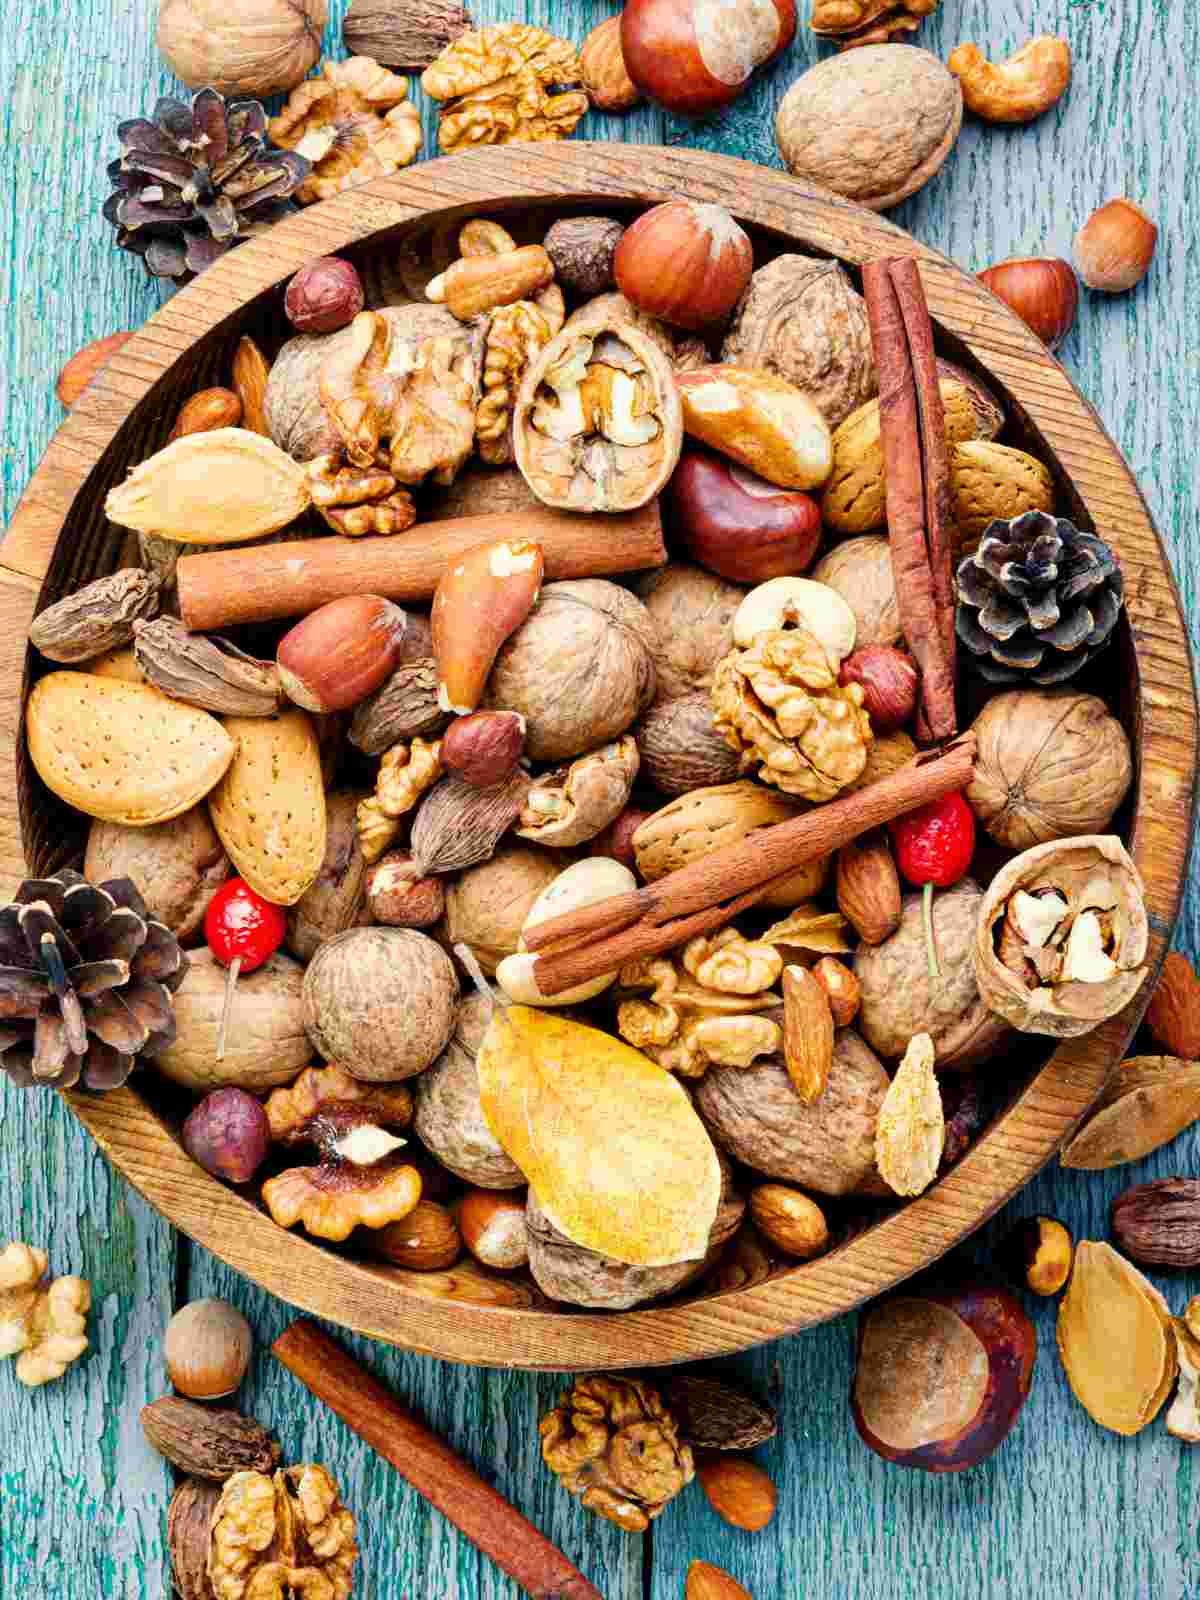 What Happens to Your Body When You Eat Nuts Every Day